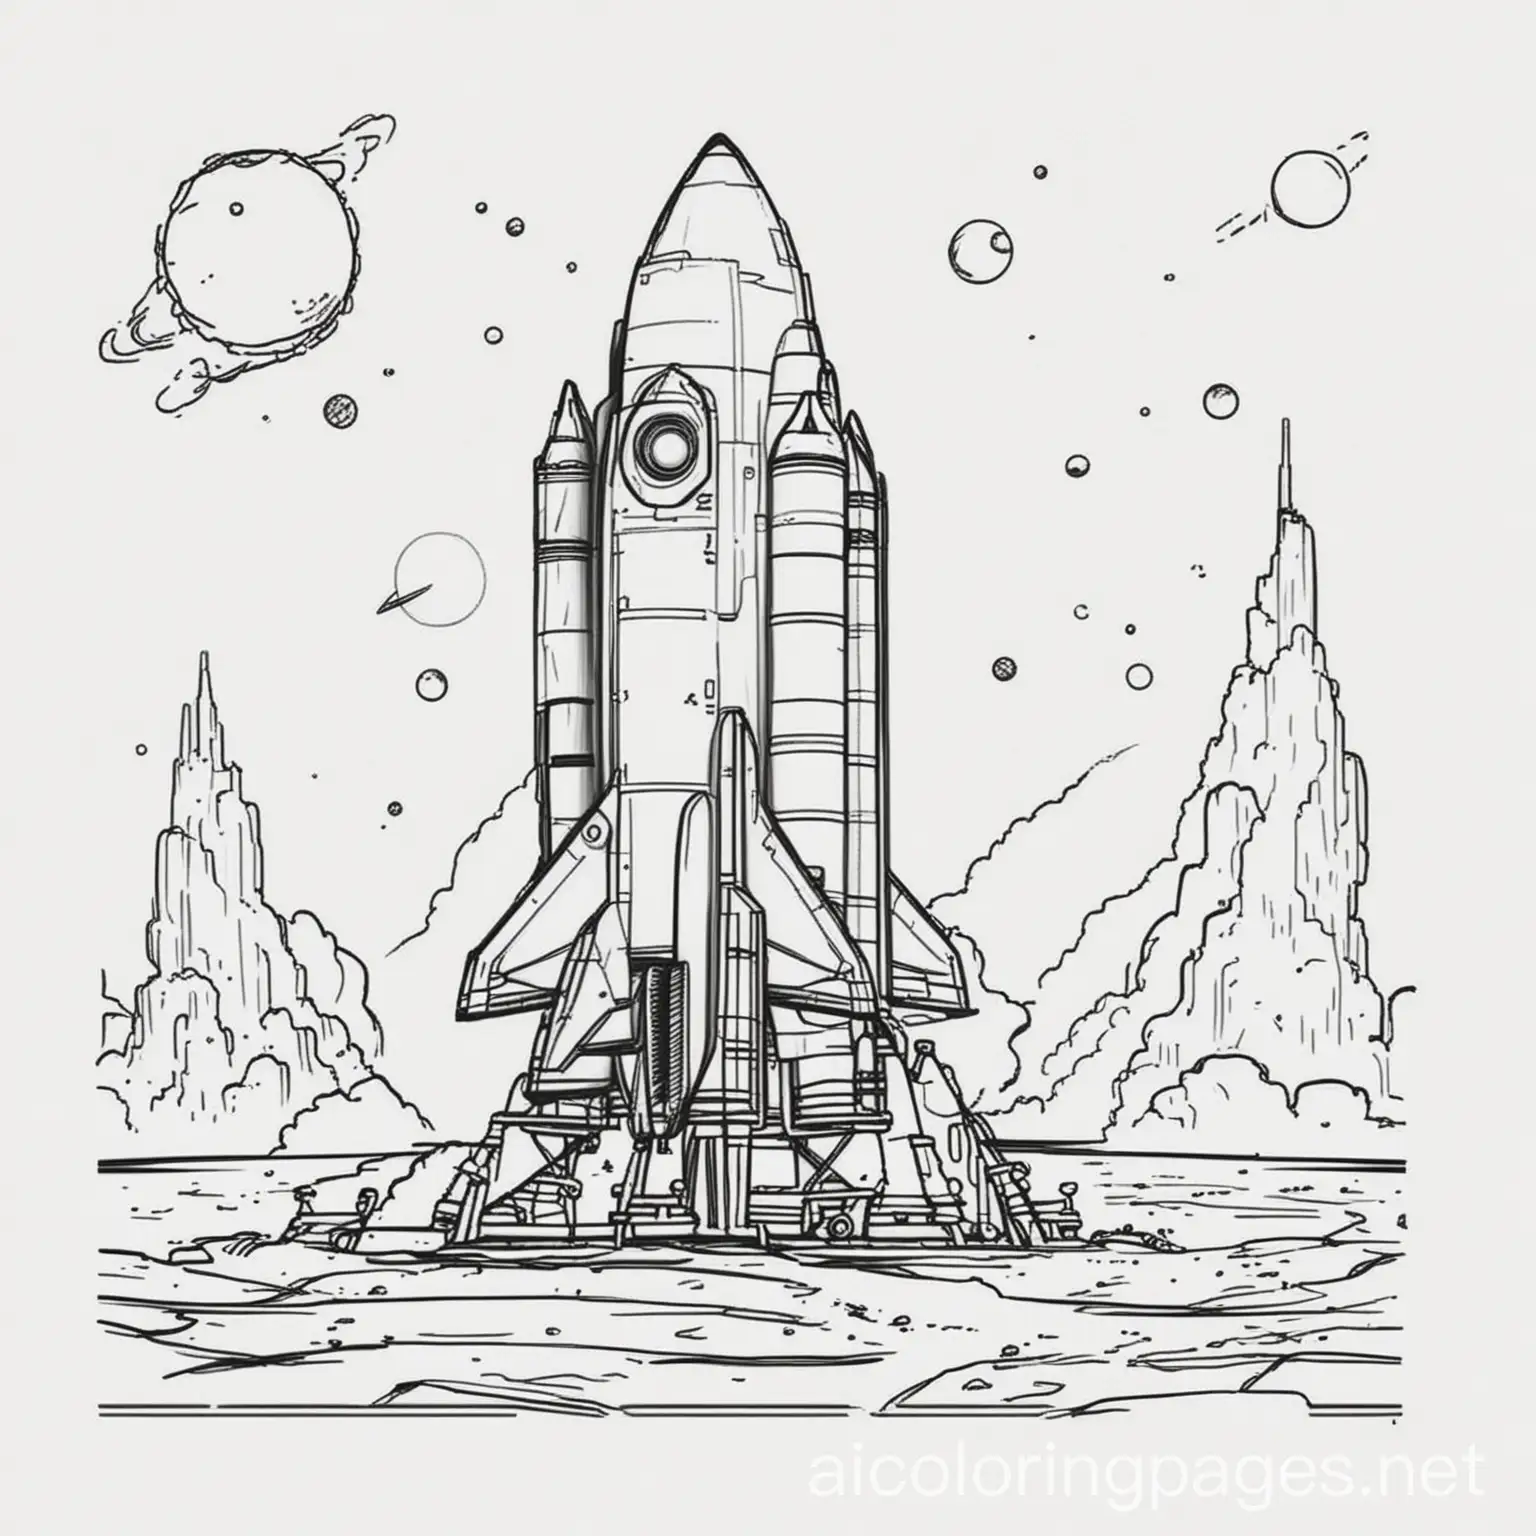 Prompt  A rocket launch pad ready for lift-off, coloring page, black and white, line art, white background, Simplicity, Ample White Space. The background of the coloring page is plain white to make it easier for children to color within the lines. The outlines of all the subjects are easy to distinguish, making it simple for kids to color without too much difficulty. There should be planets on the background to color, Coloring Page, black and white, line art, white background, Simplicity, Ample White Space. The background of the coloring page is plain white to make it easy for young children to color within the lines. The outlines of all the subjects are easy to distinguish, making it simple for kids to color without too much difficulty